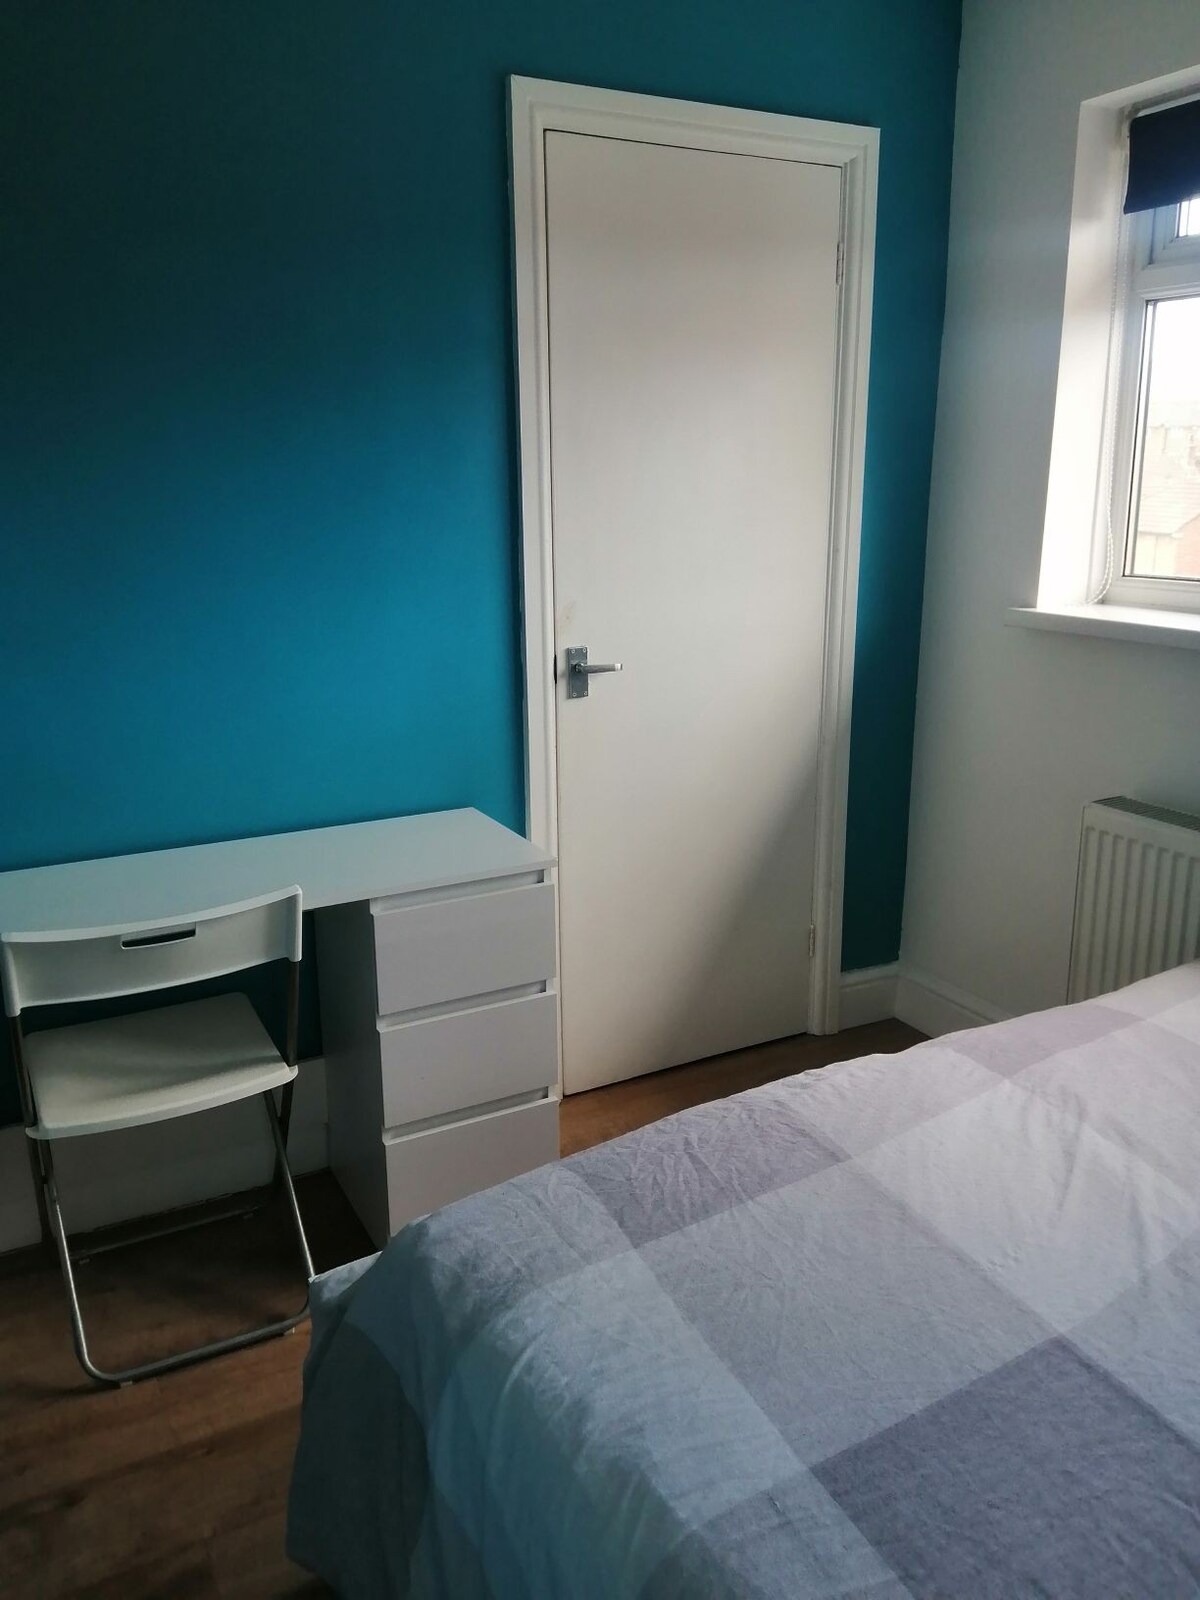 Large room close to hospital.